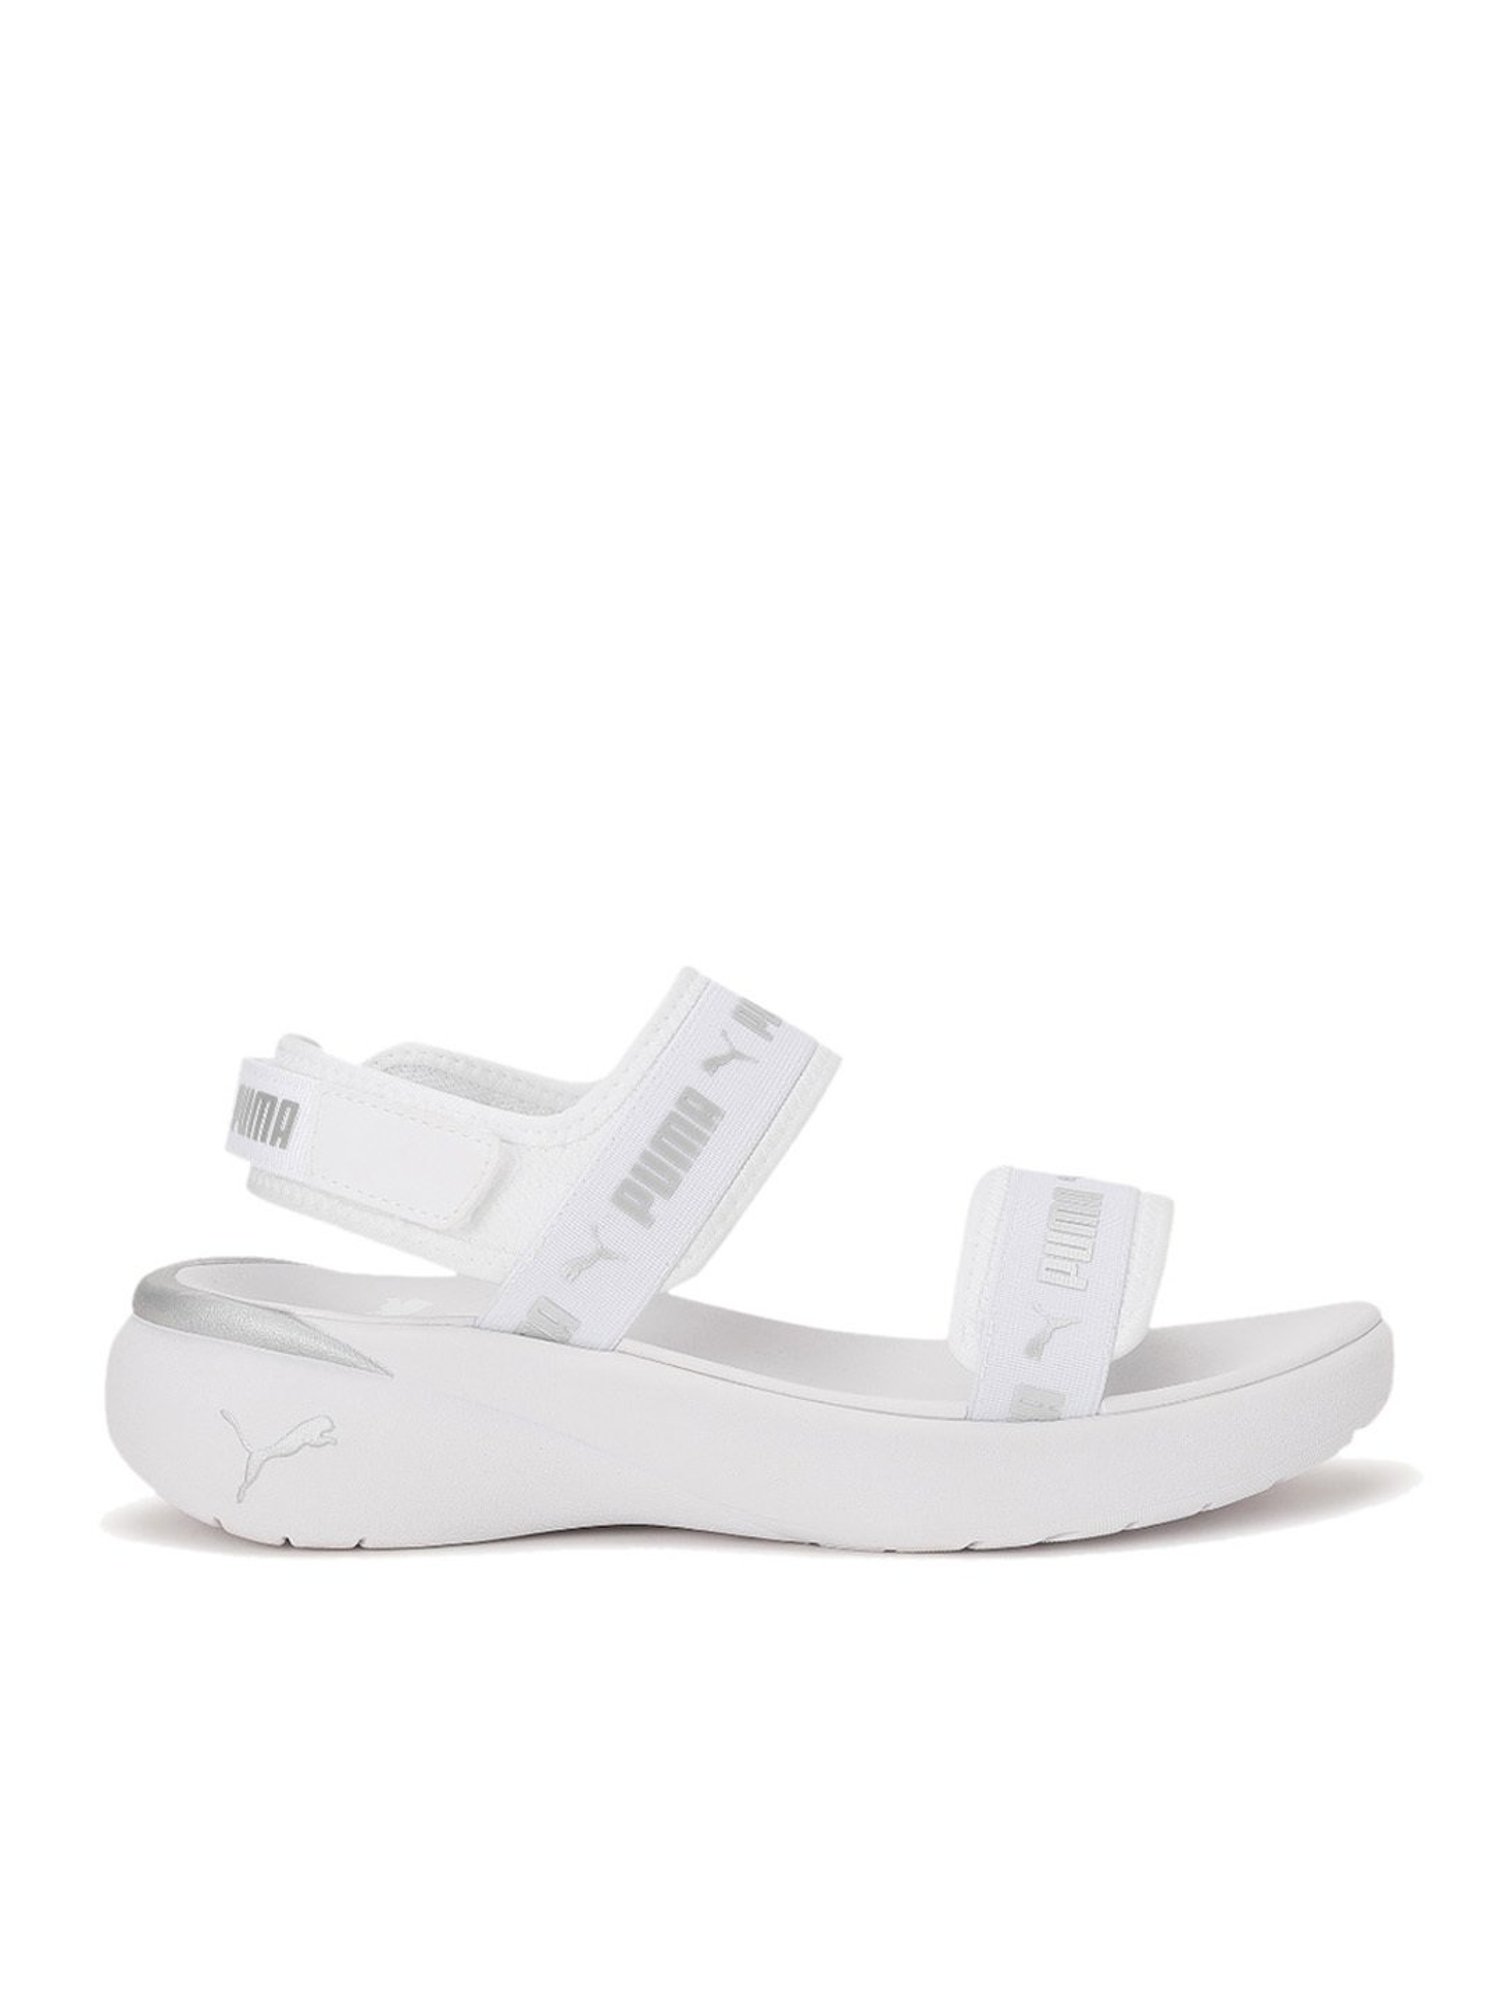 Buy Puma Women's Suede Mayu Summer White Sling Back Sandals for Women at  Best Price @ Tata CLiQ